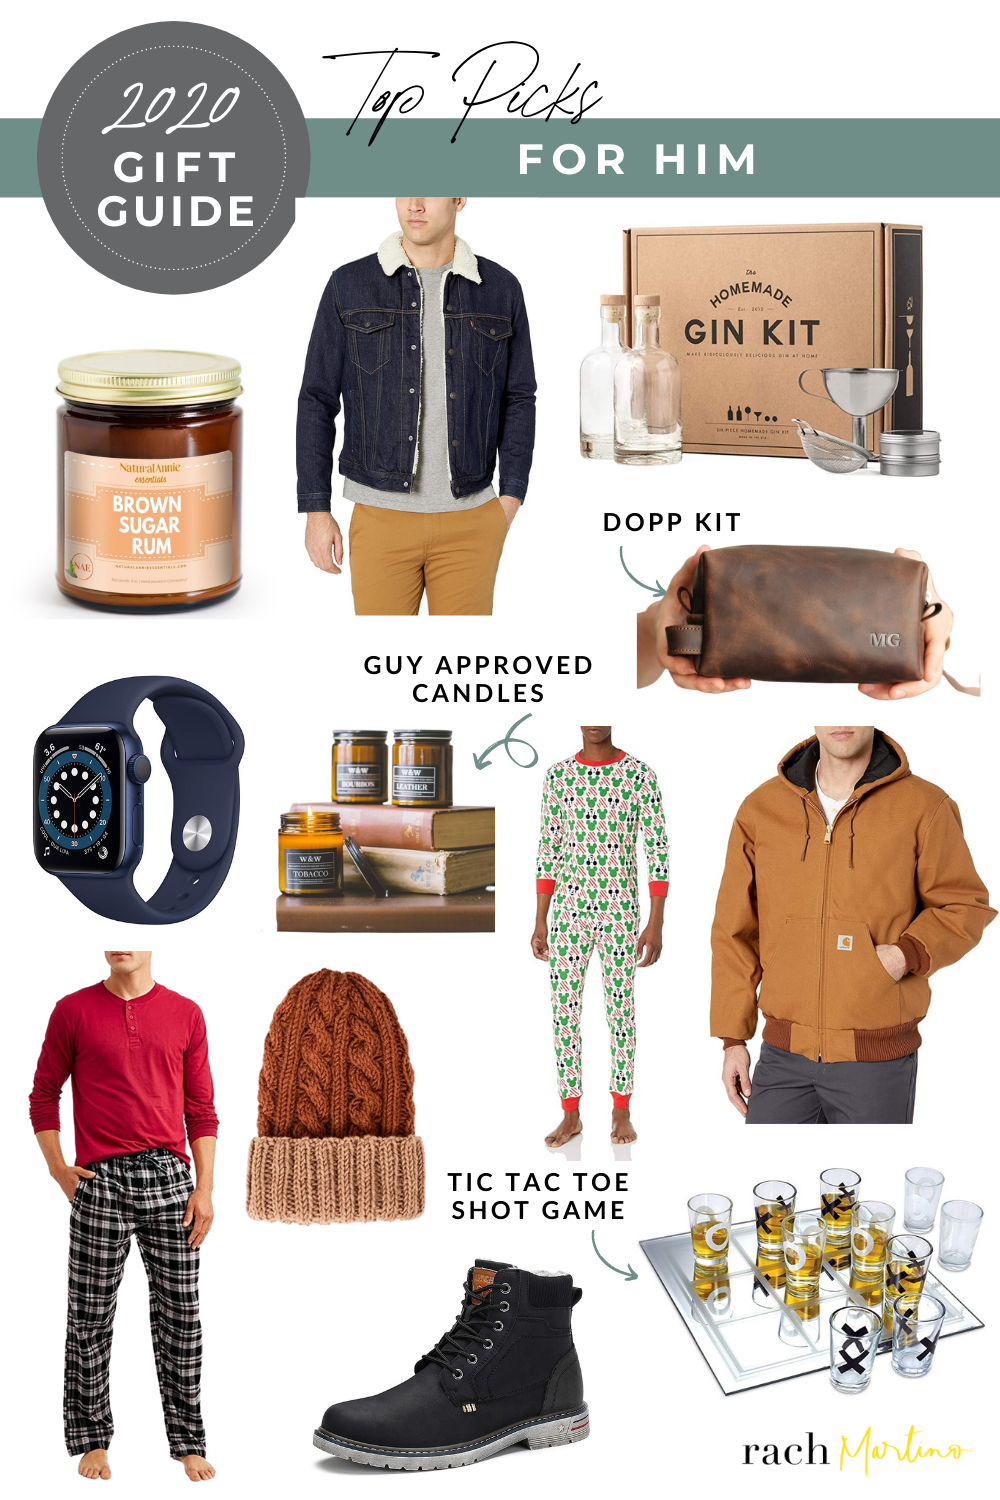 2020 Gift Guide Top Picks for Him